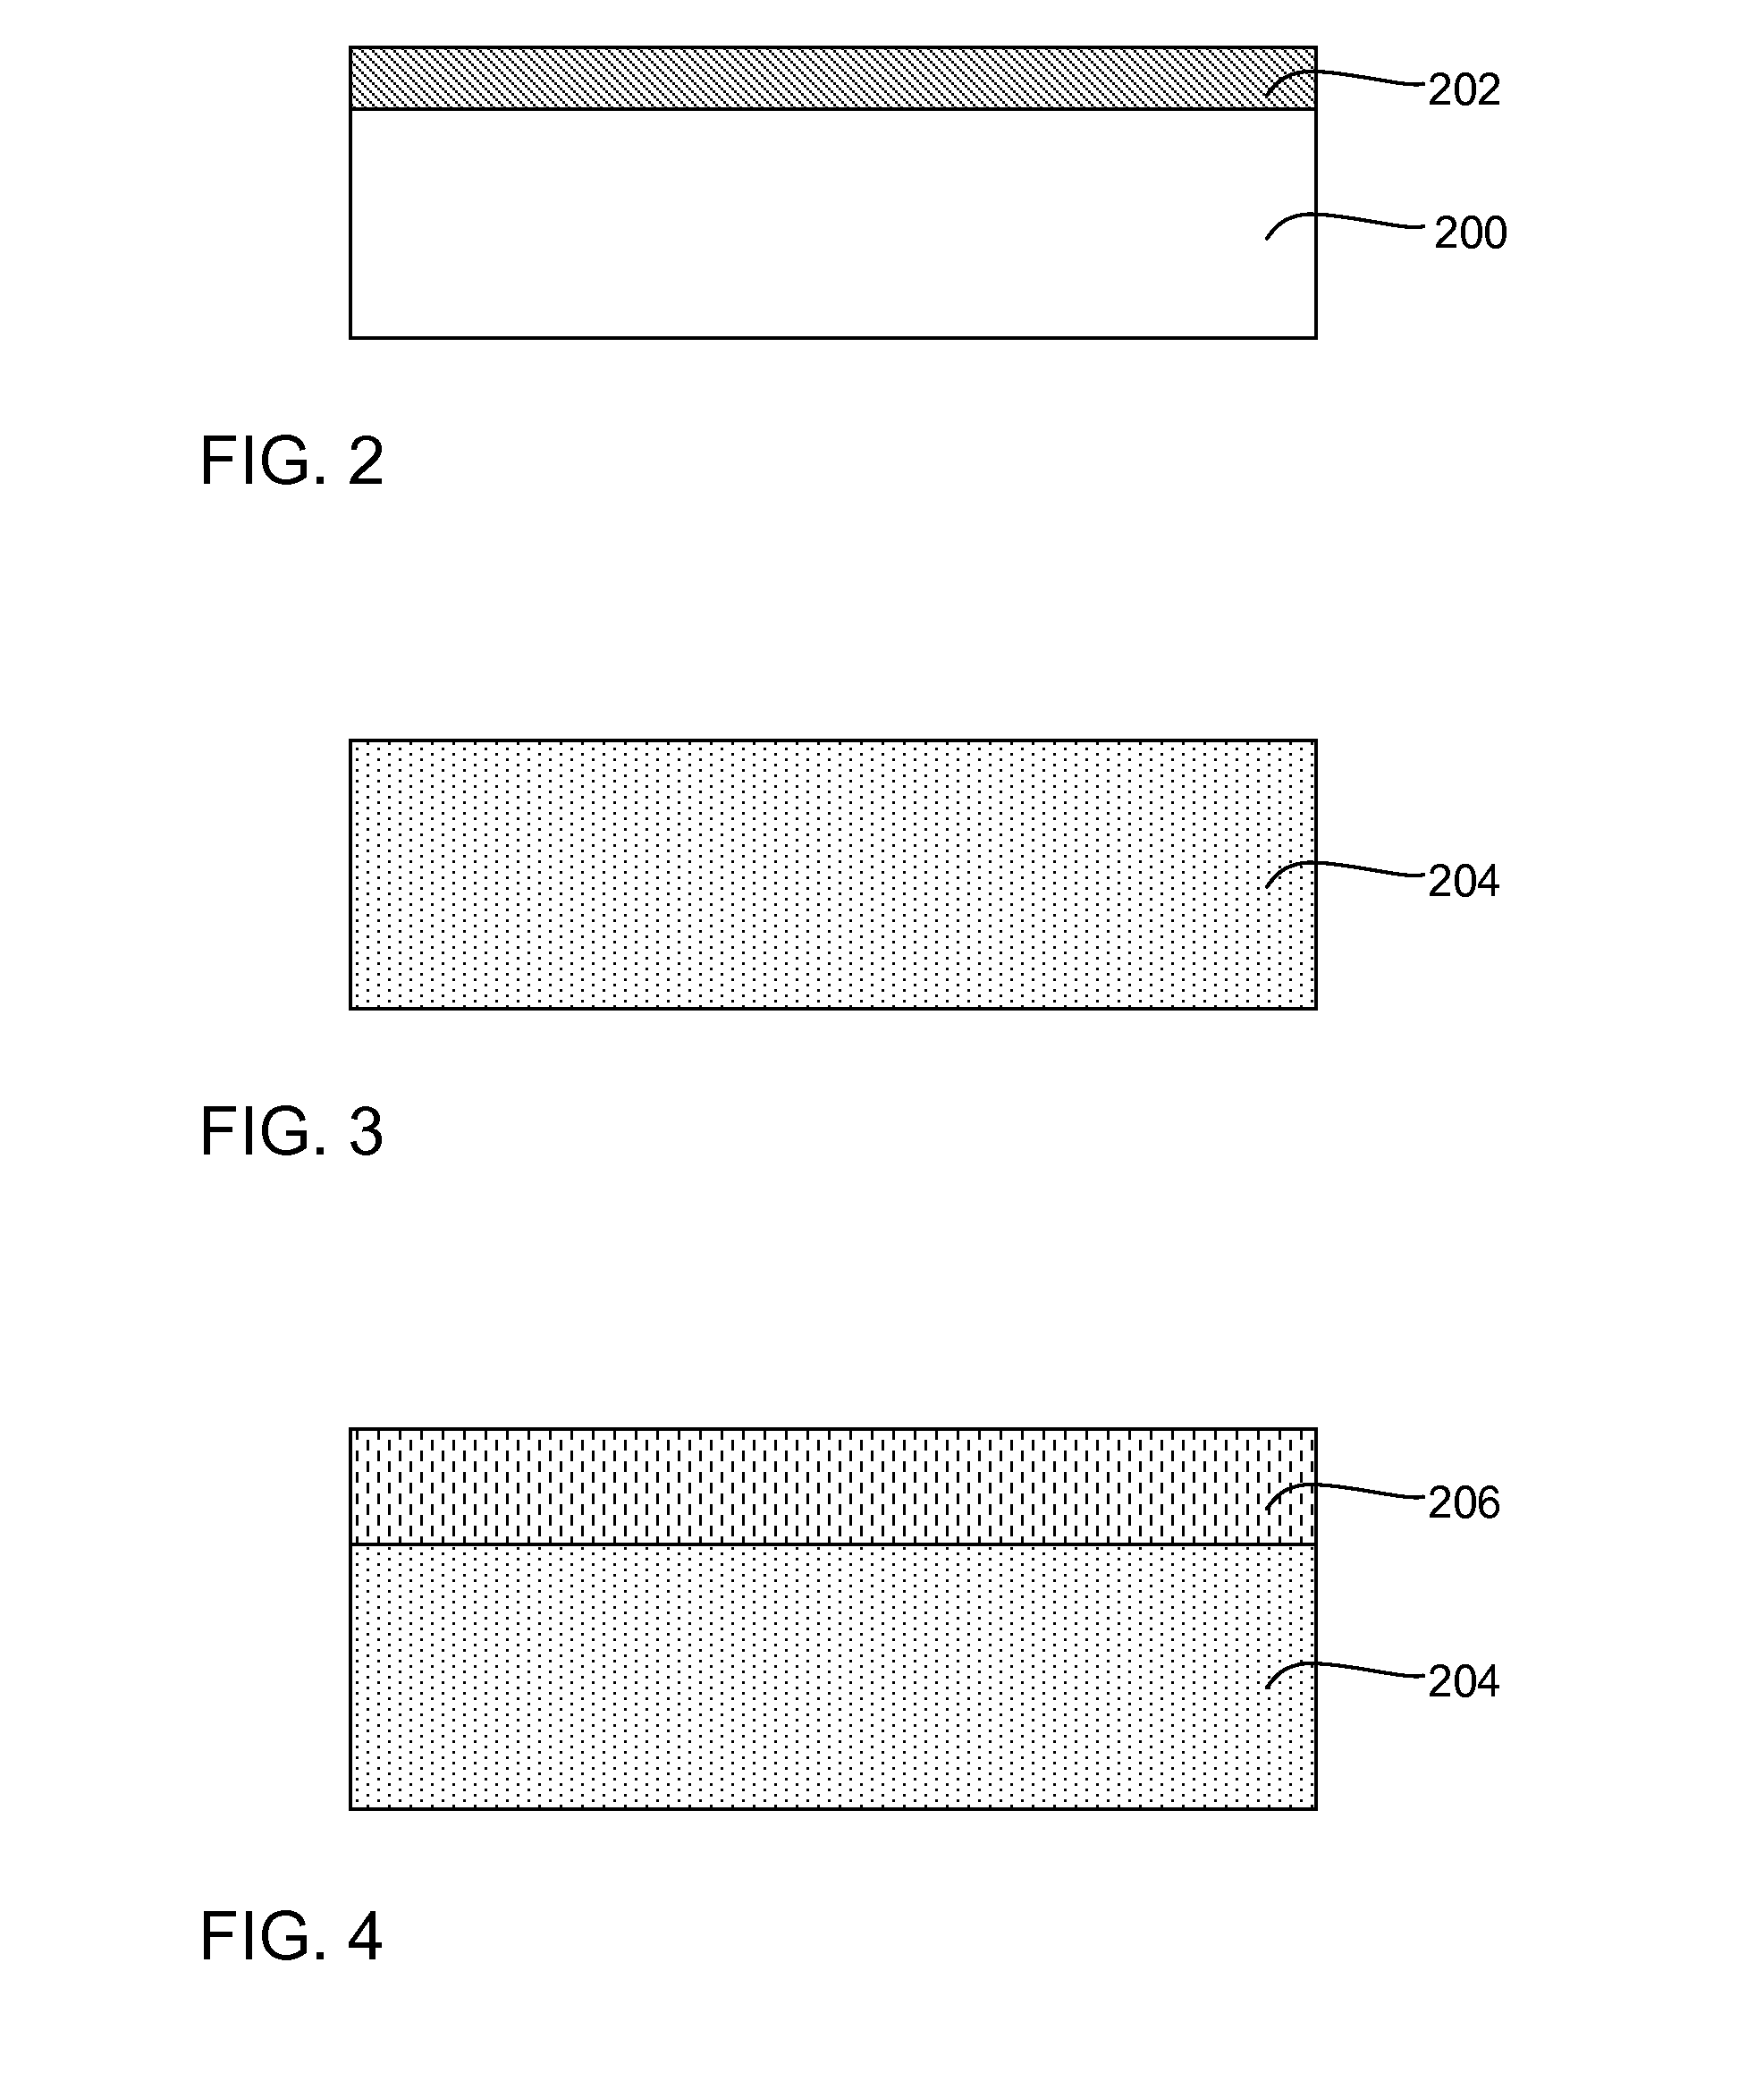 Method of producing bonded wafer structure with buried oxide/nitride layers